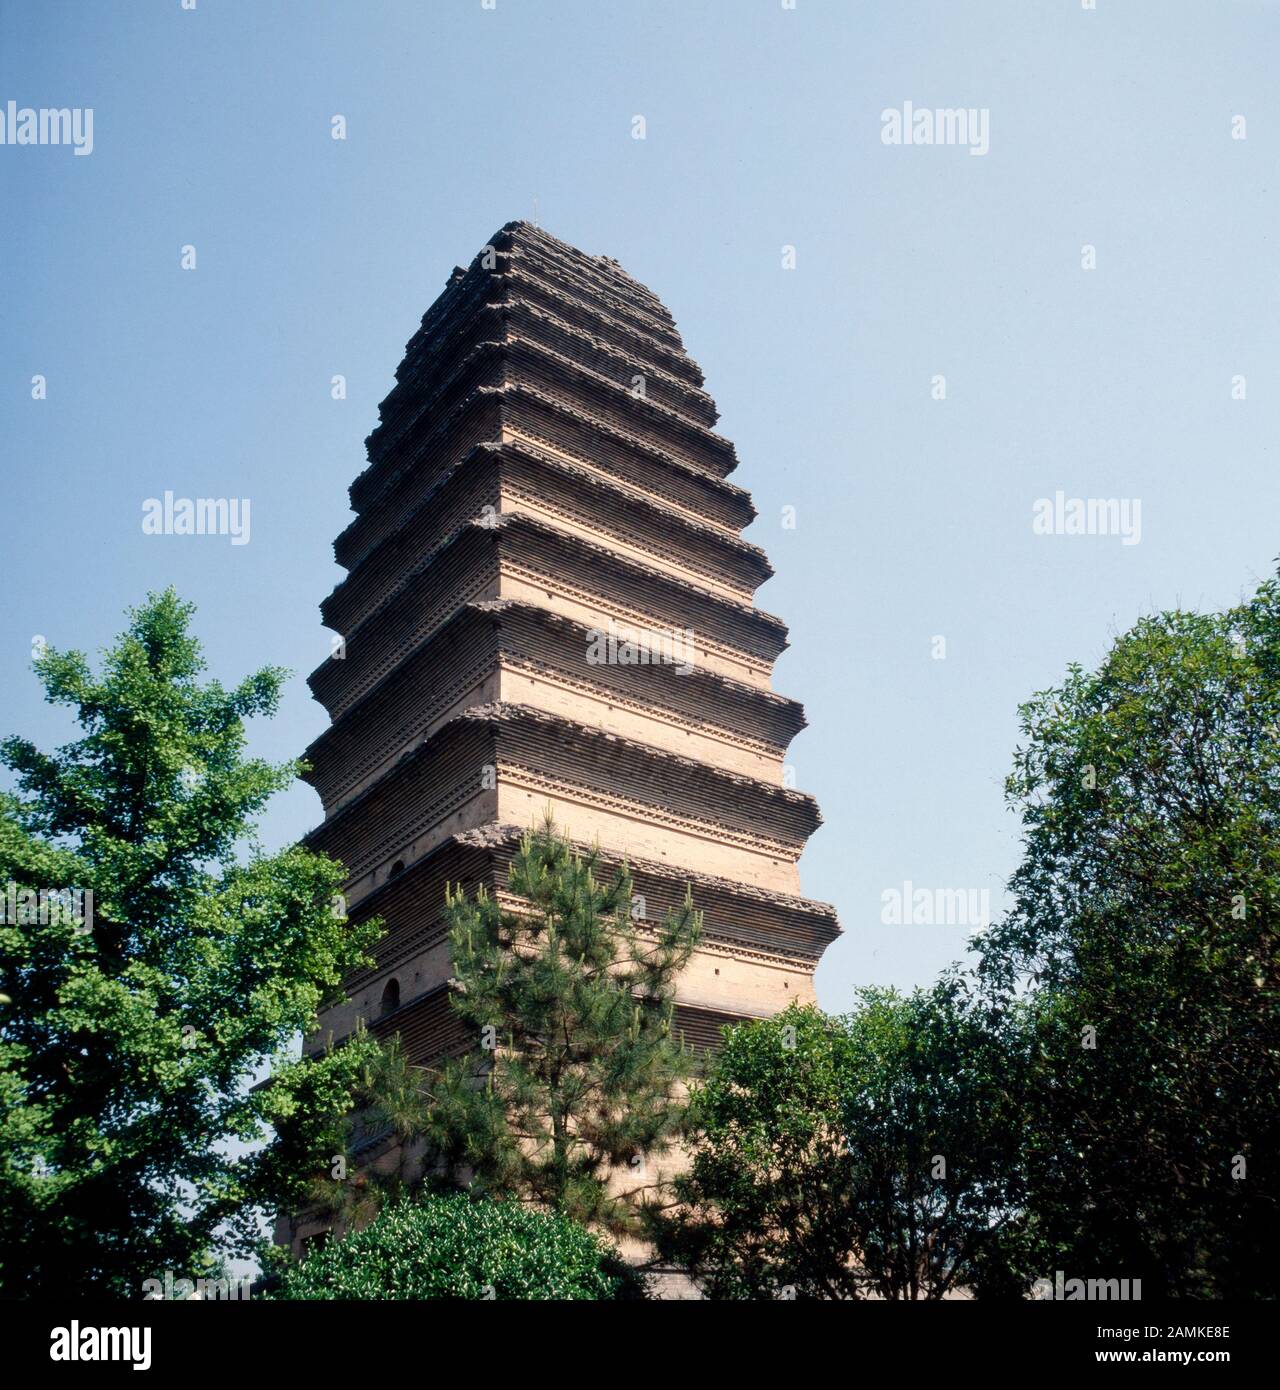 Turm der Kleinen Wildgans Pagode in der Stadt Xian, China 1980er Jahre. Tower of the Small Wild Goose Pagoda at the city of Xian, China 1980s. Stock Photo